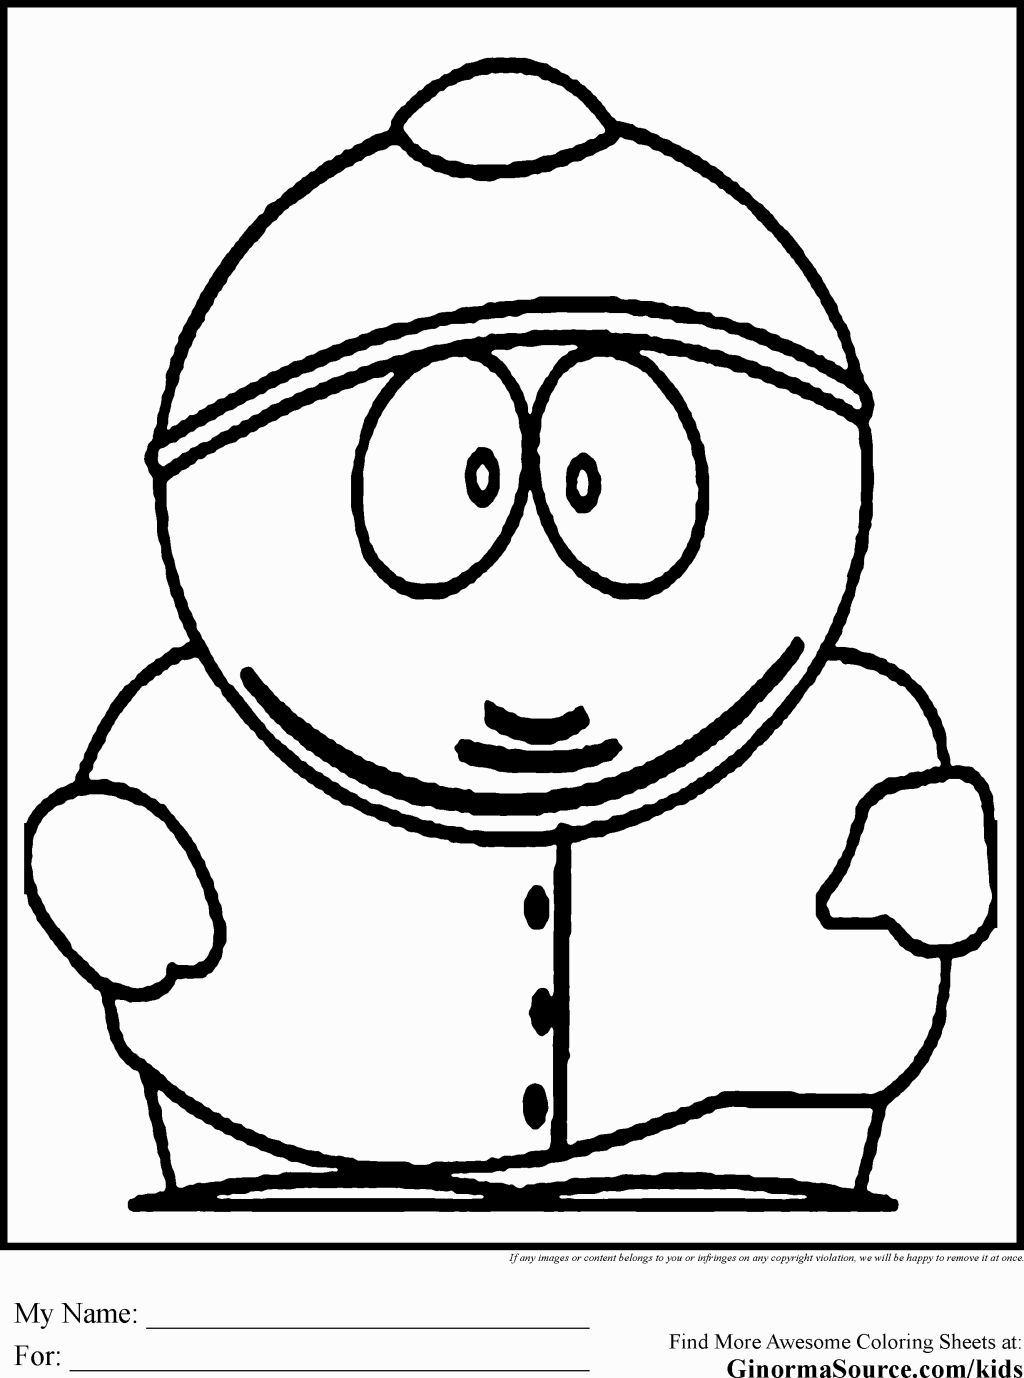 South Park Coloring Page South Park Coloring Page Coloring Pages